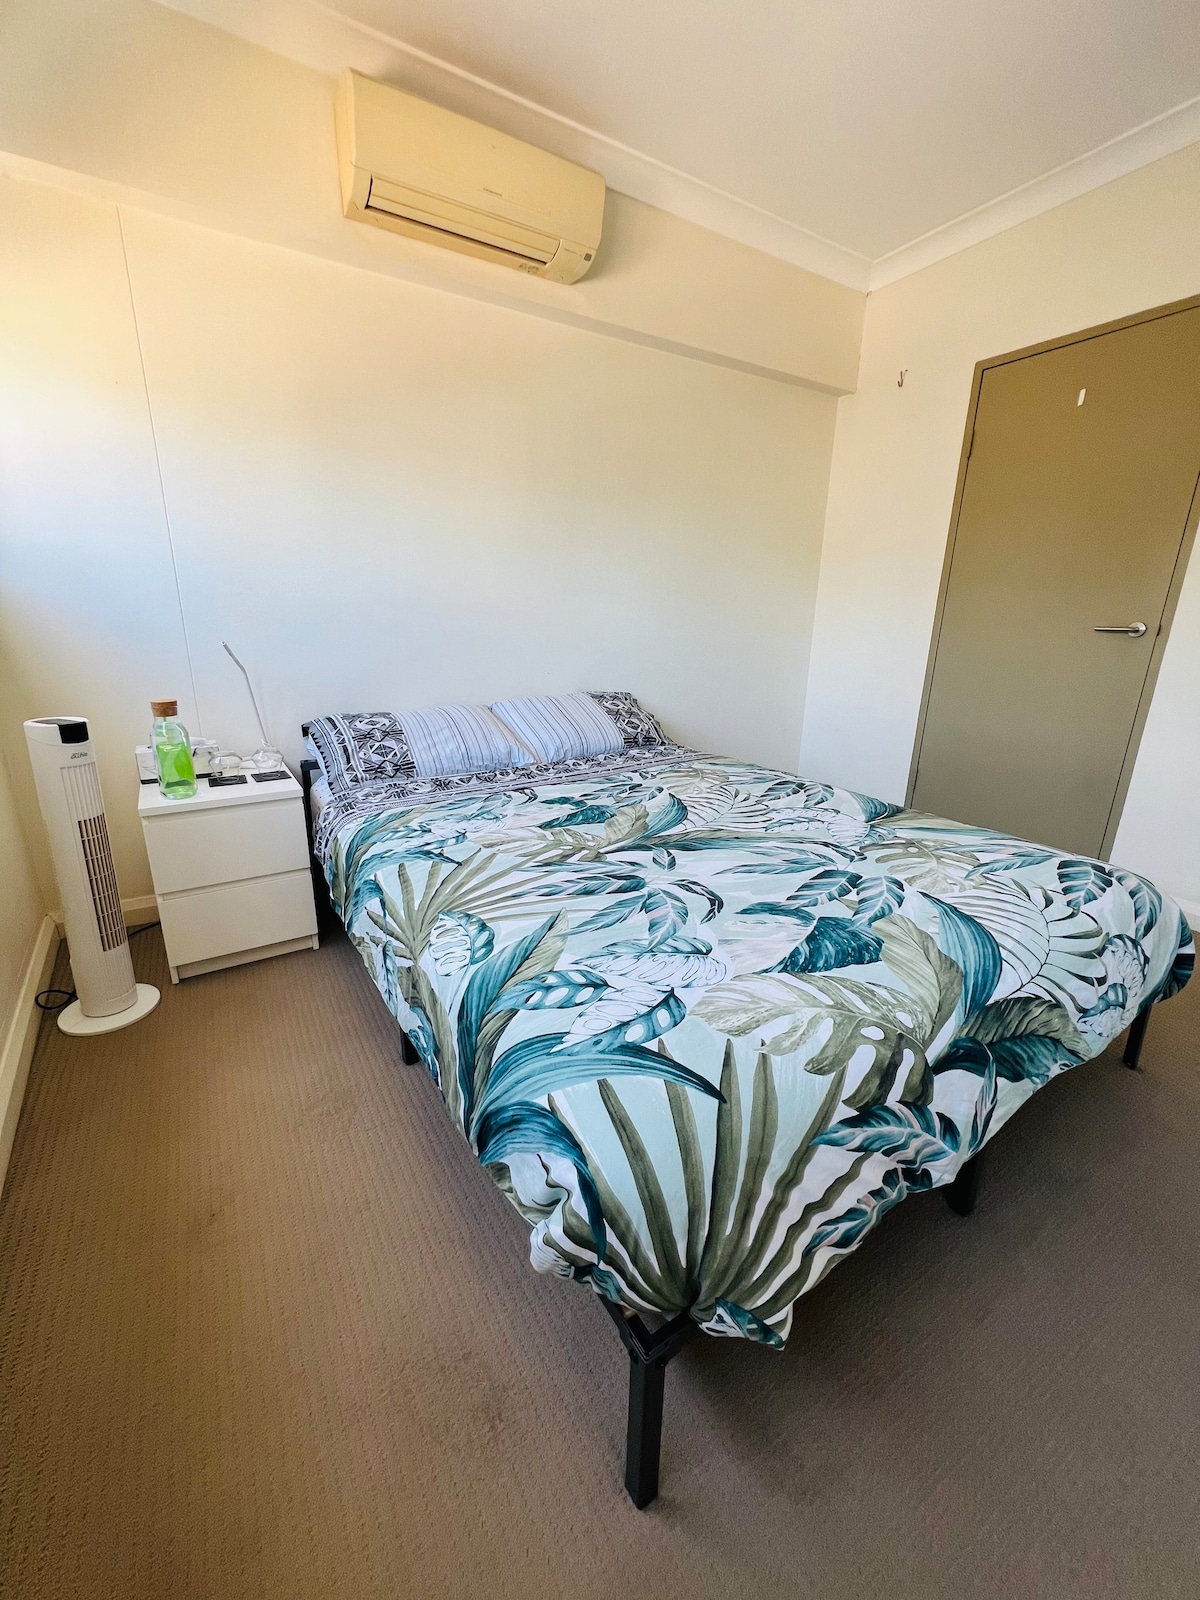 Own Queen Bedroom and Bathroom in Shared Apartment